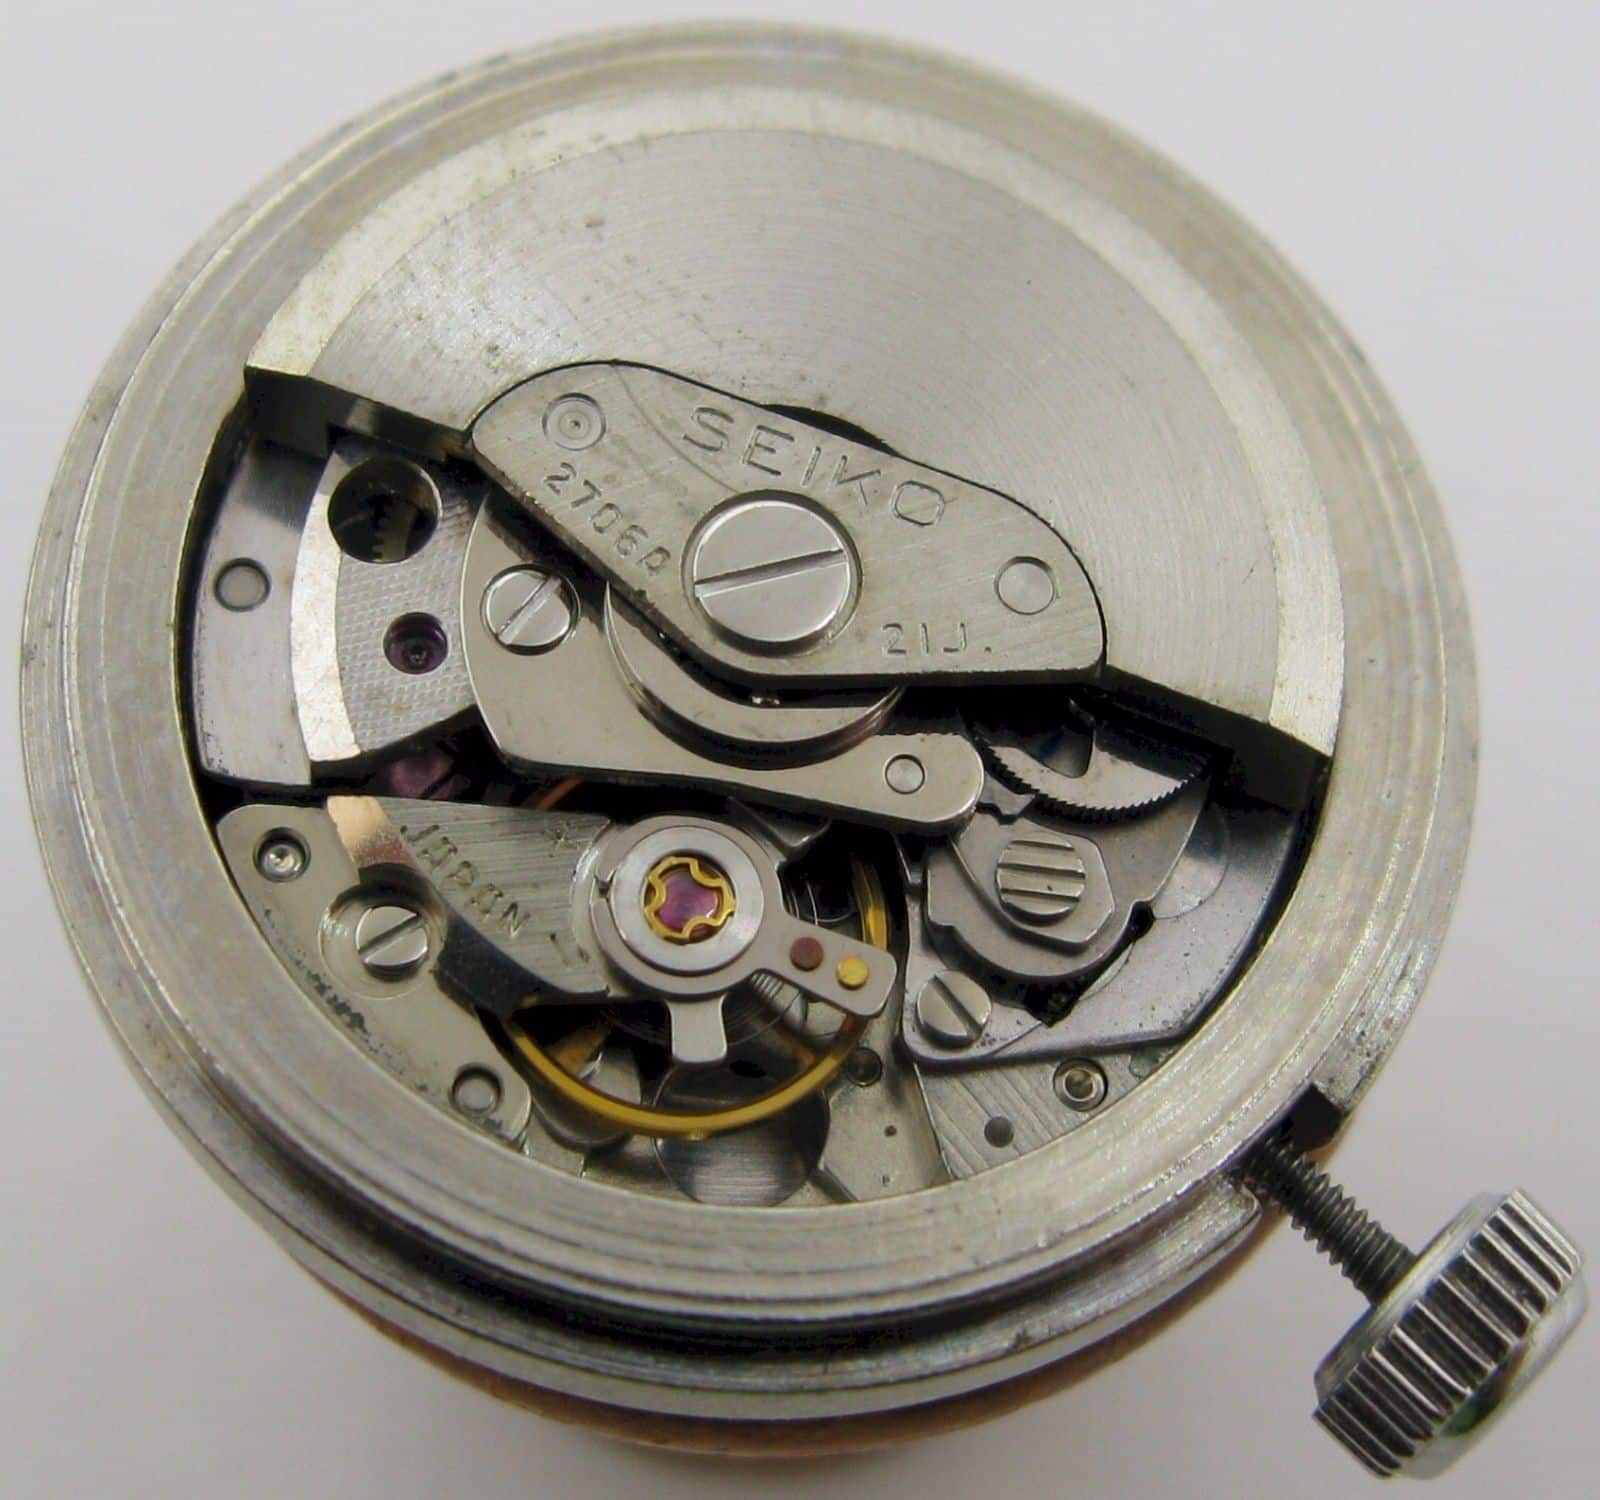 Seiko caliber 2706A movement – specifications and photo